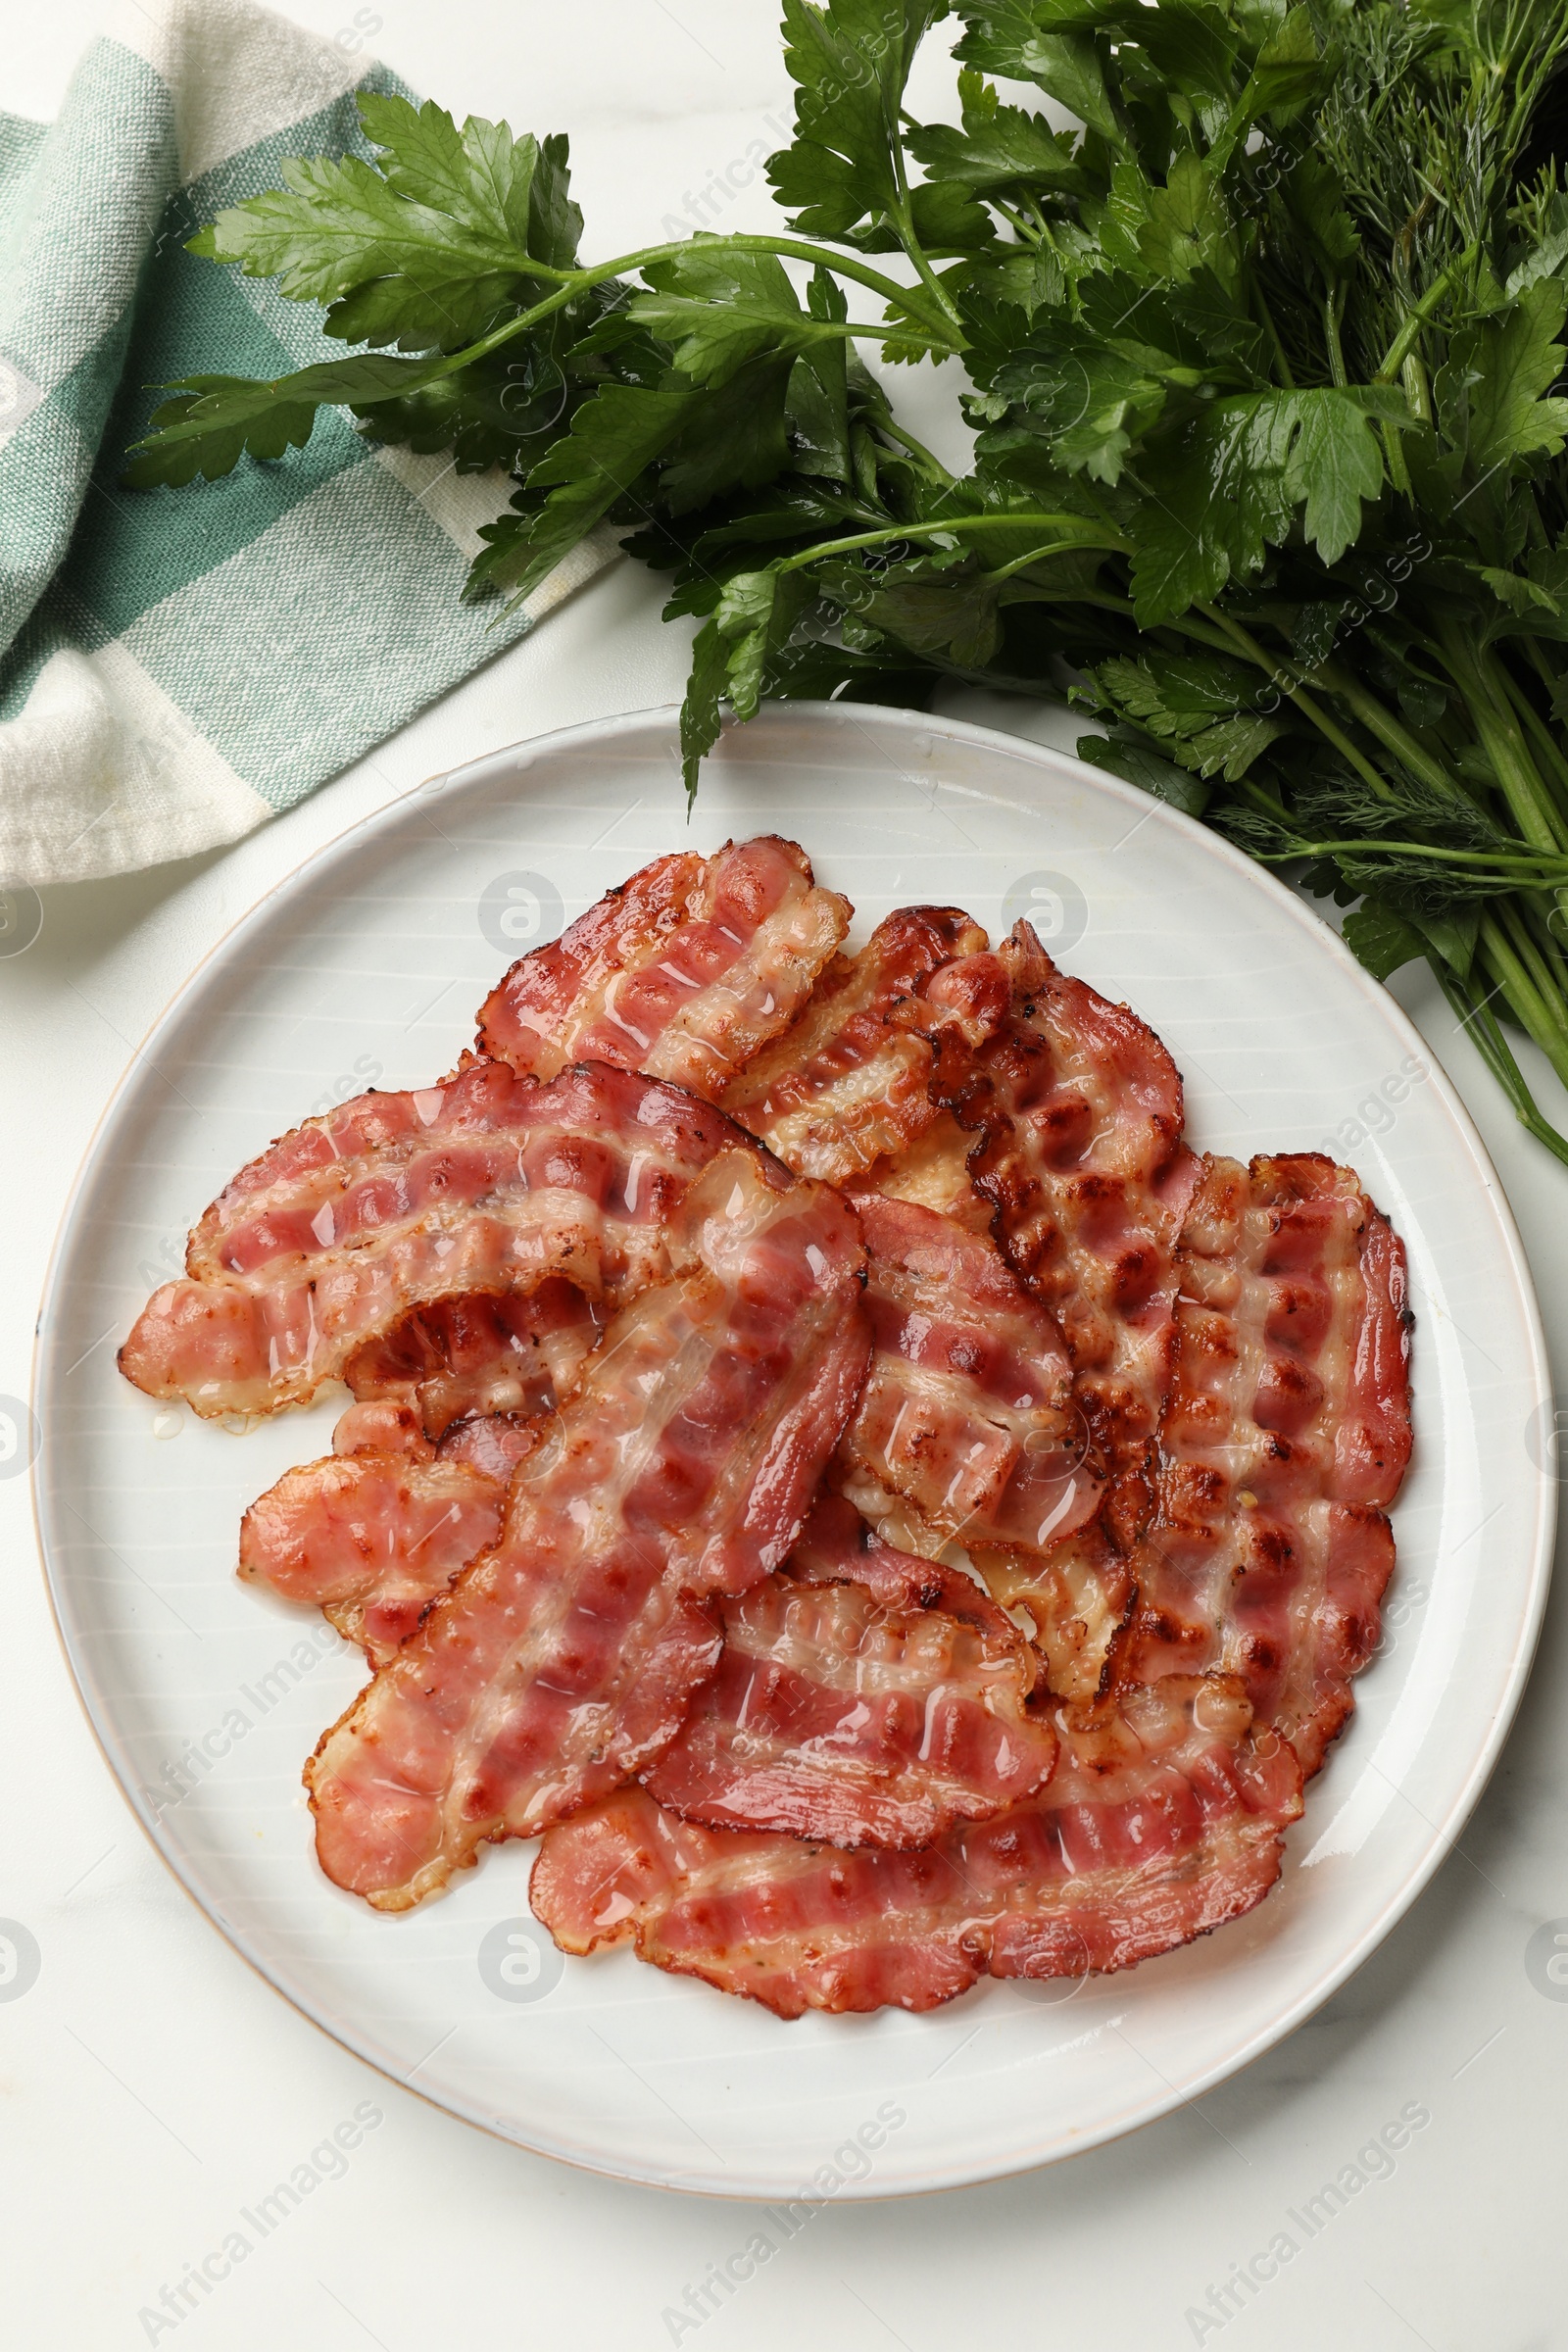 Photo of Plate with fried bacon slices and parsley on white table, top view